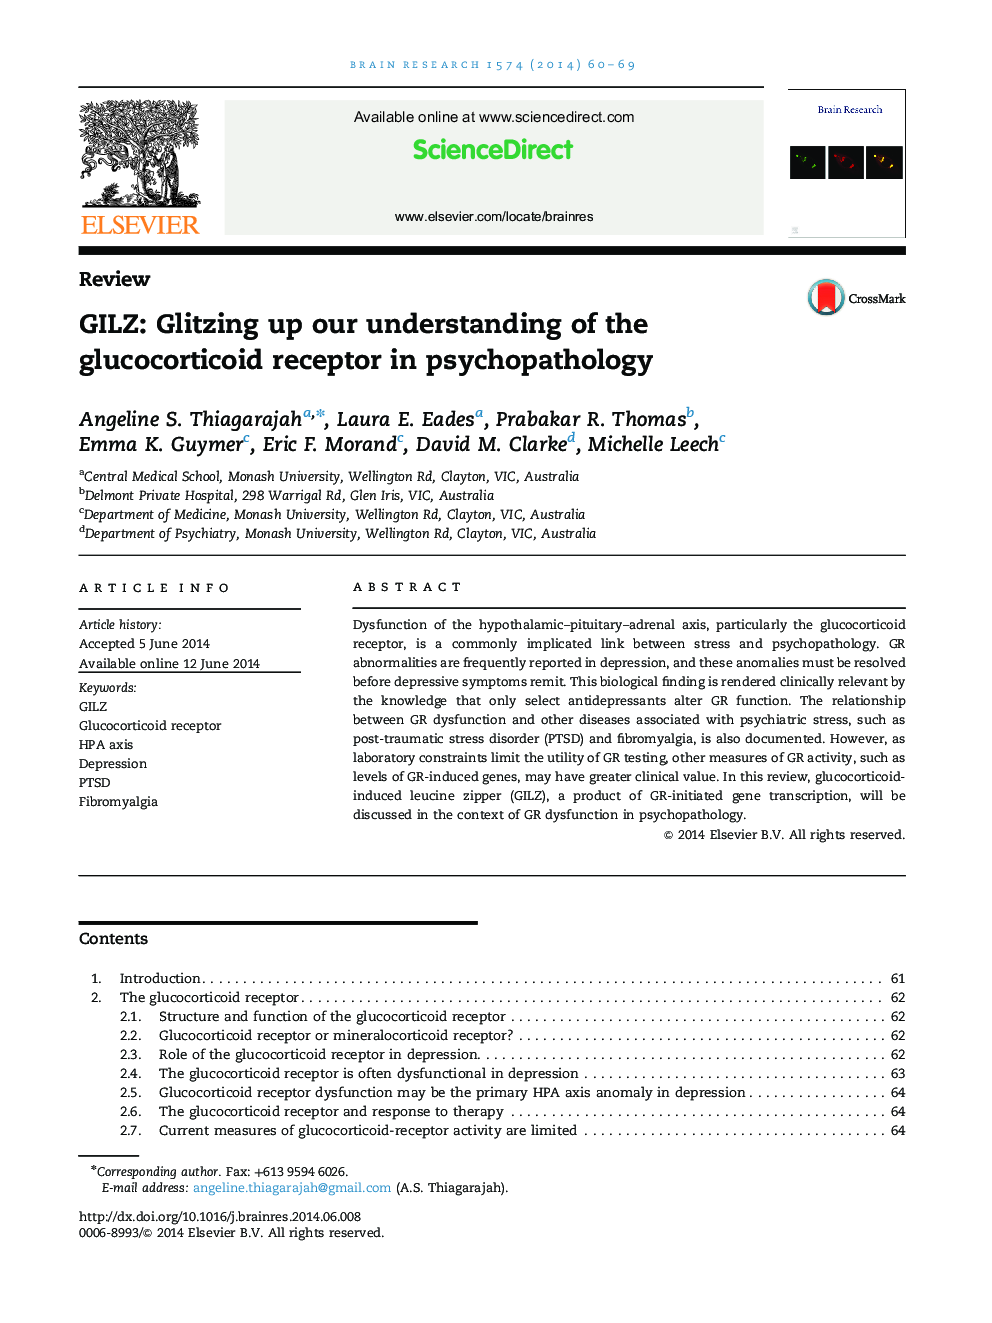 GILZ: Glitzing up our understanding of the glucocorticoid receptor in psychopathology